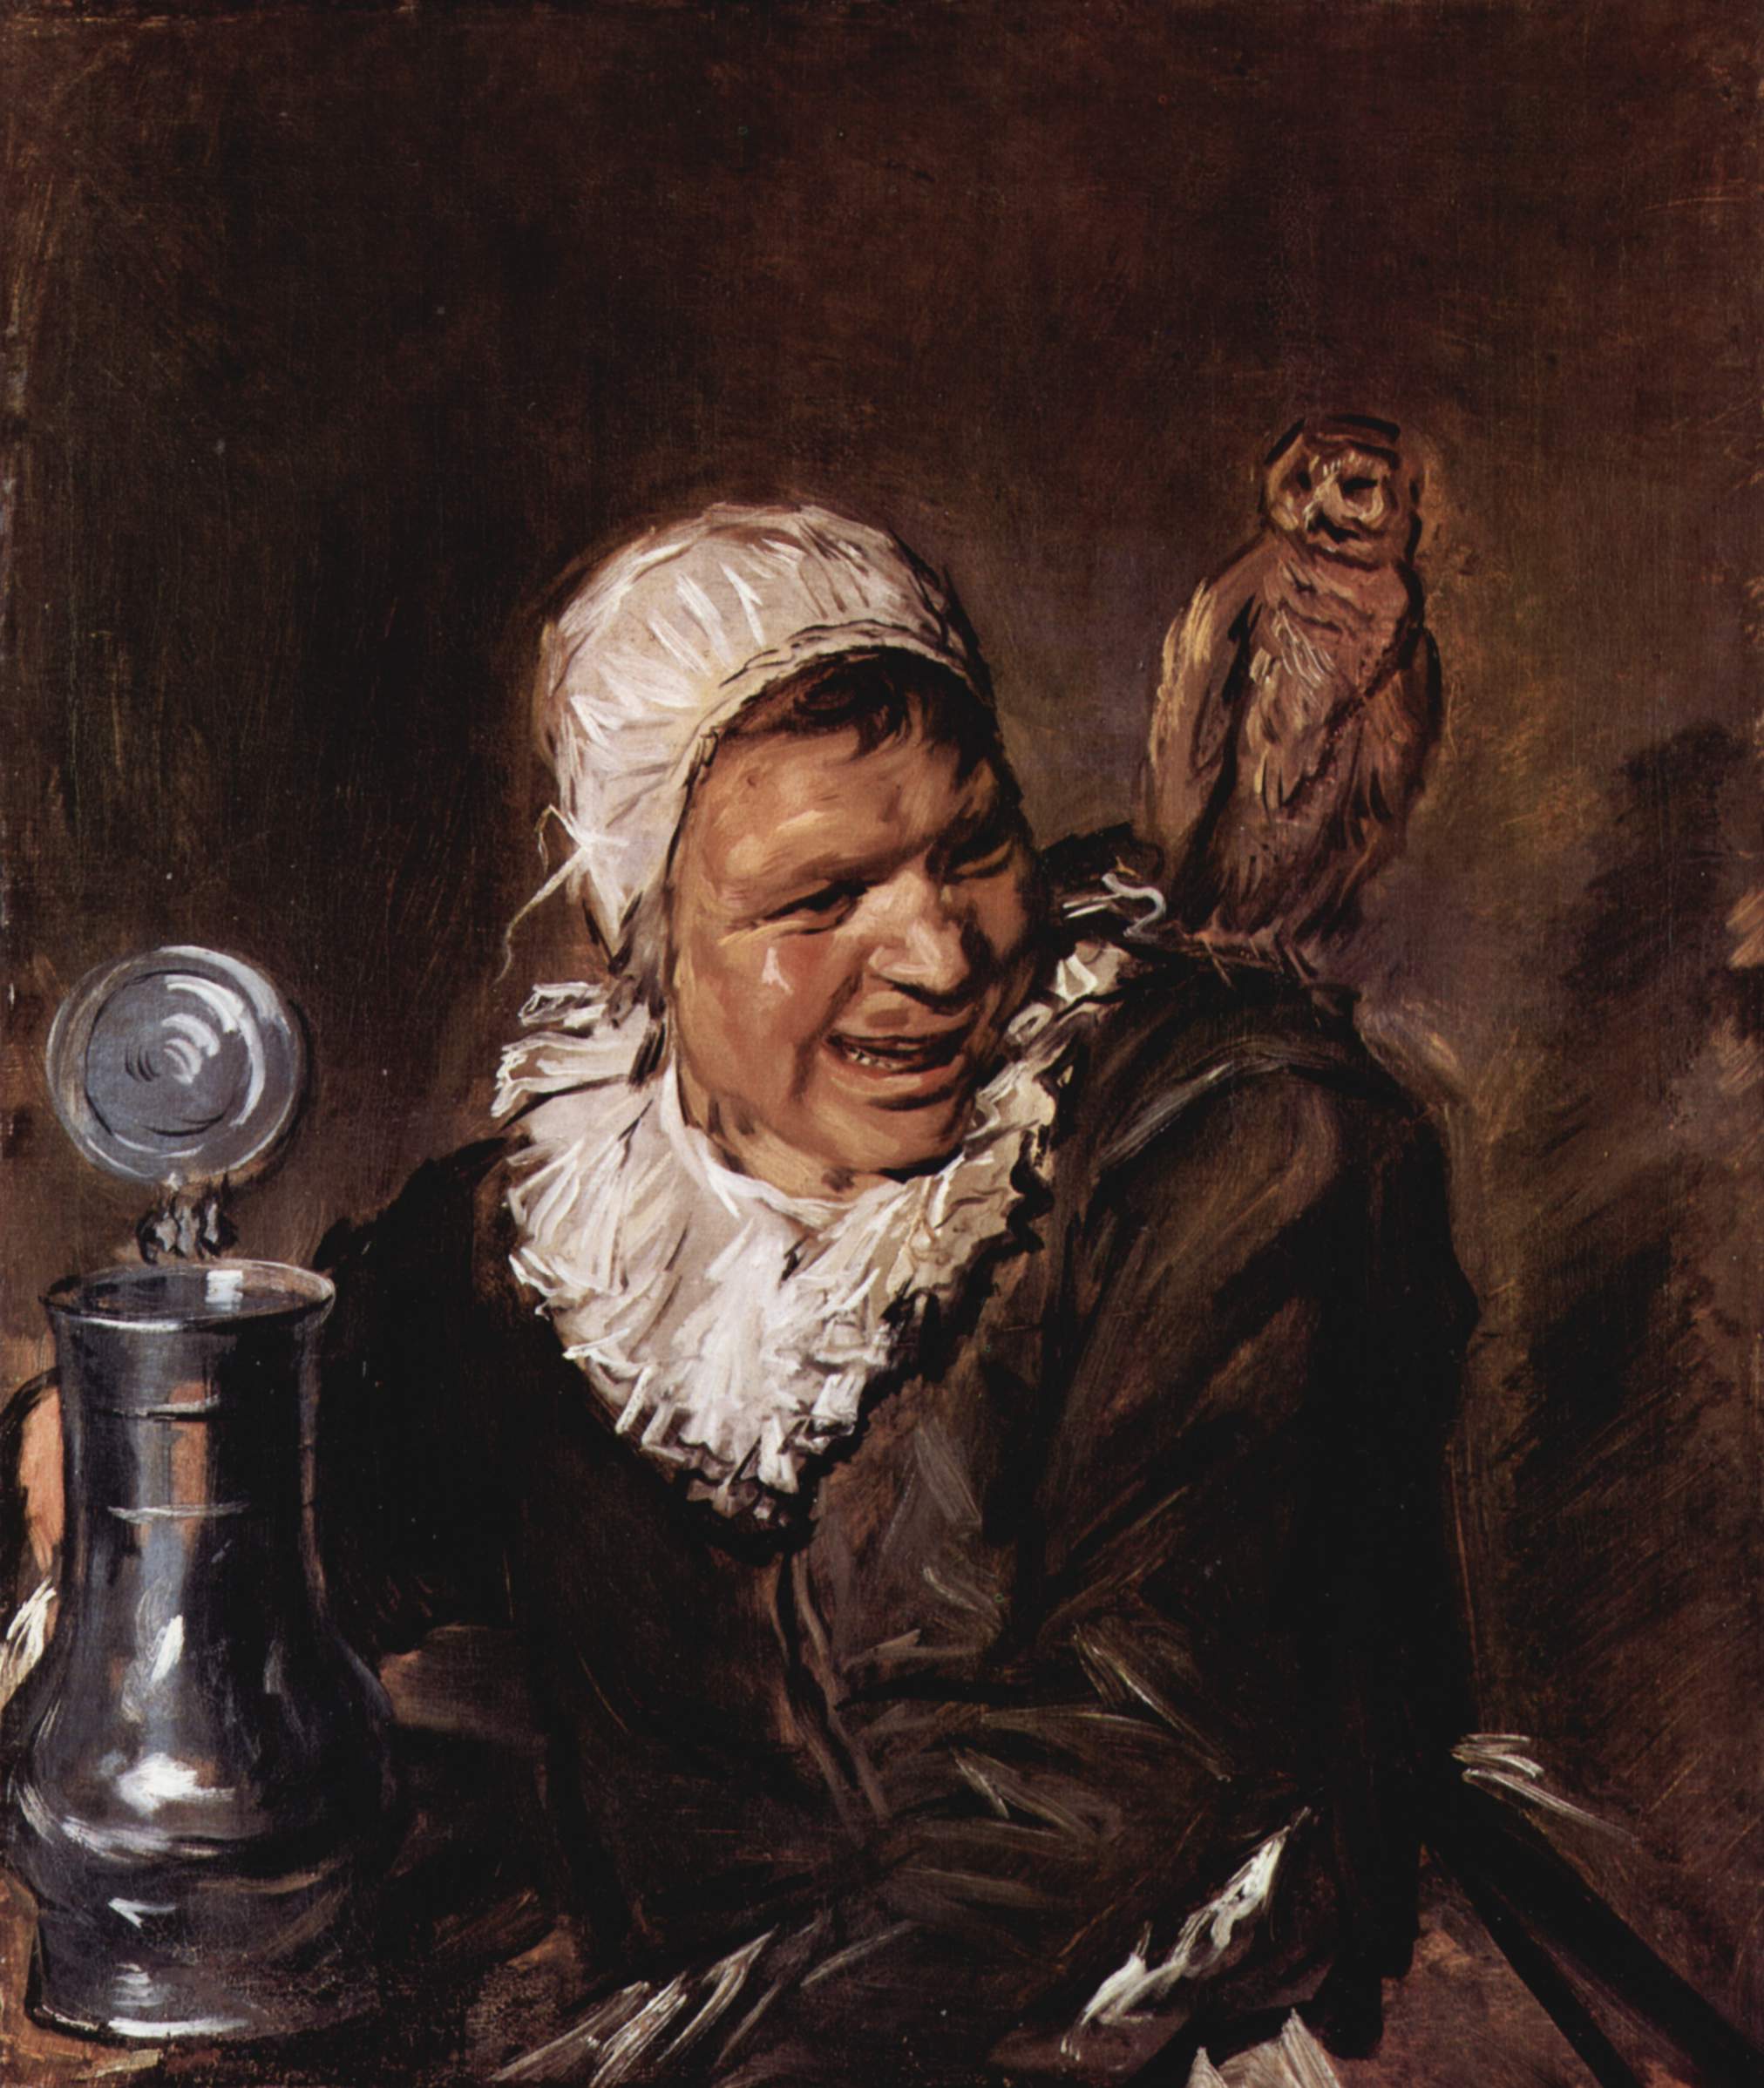 Malle Babbe by Frans Hals - 1633-1635 - 75 × 64 cm 